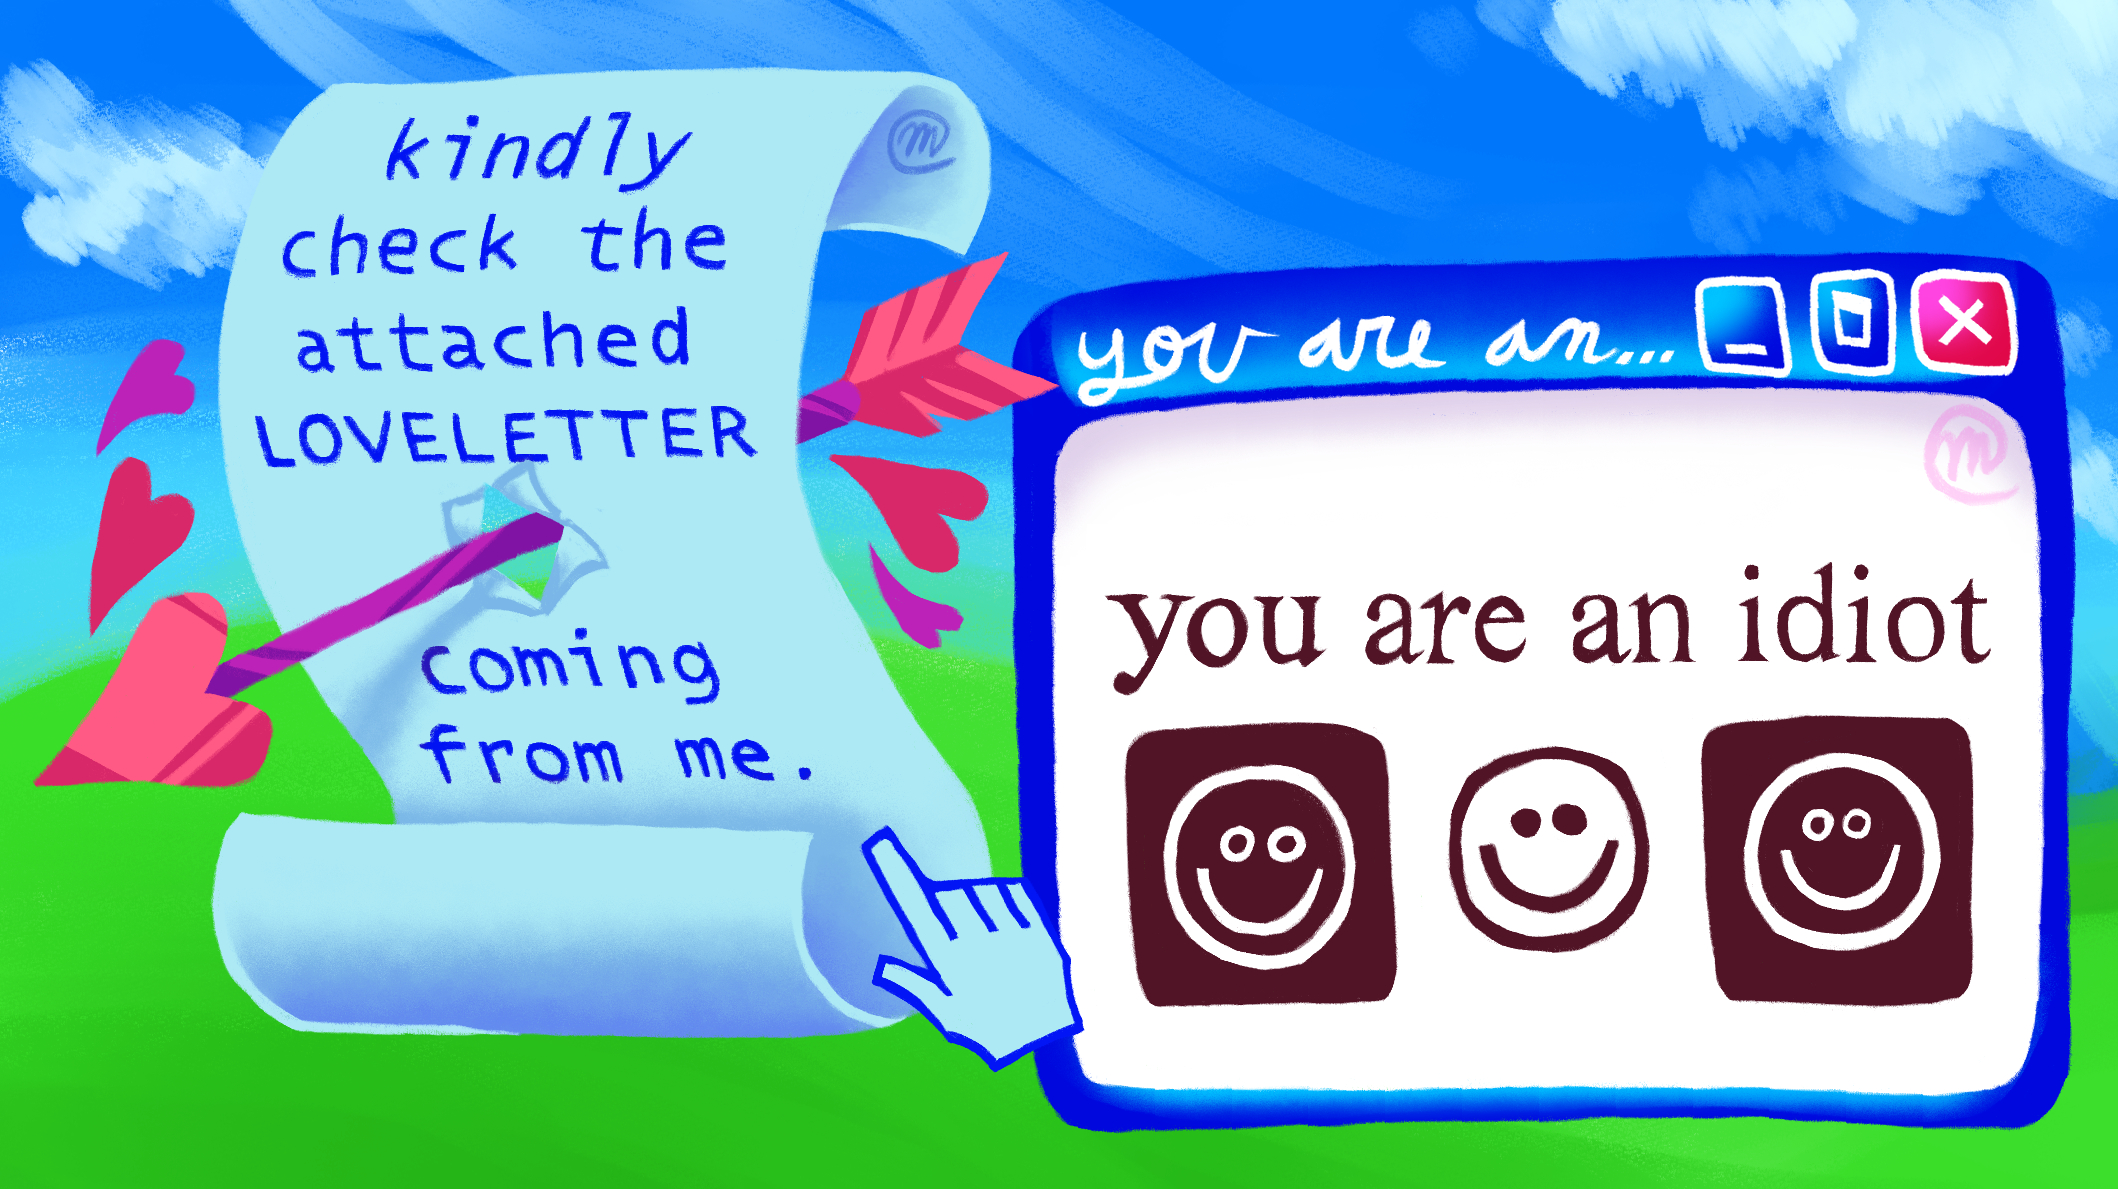 A painting of a scroll pierced by an arrow tipped with a heart, that says 'Kindly check the attached love letter for you'. Next to it is a computer pop-up that says 'You are an idiot' with black and white smileys beneath. The background is a landscape of a grassy field.